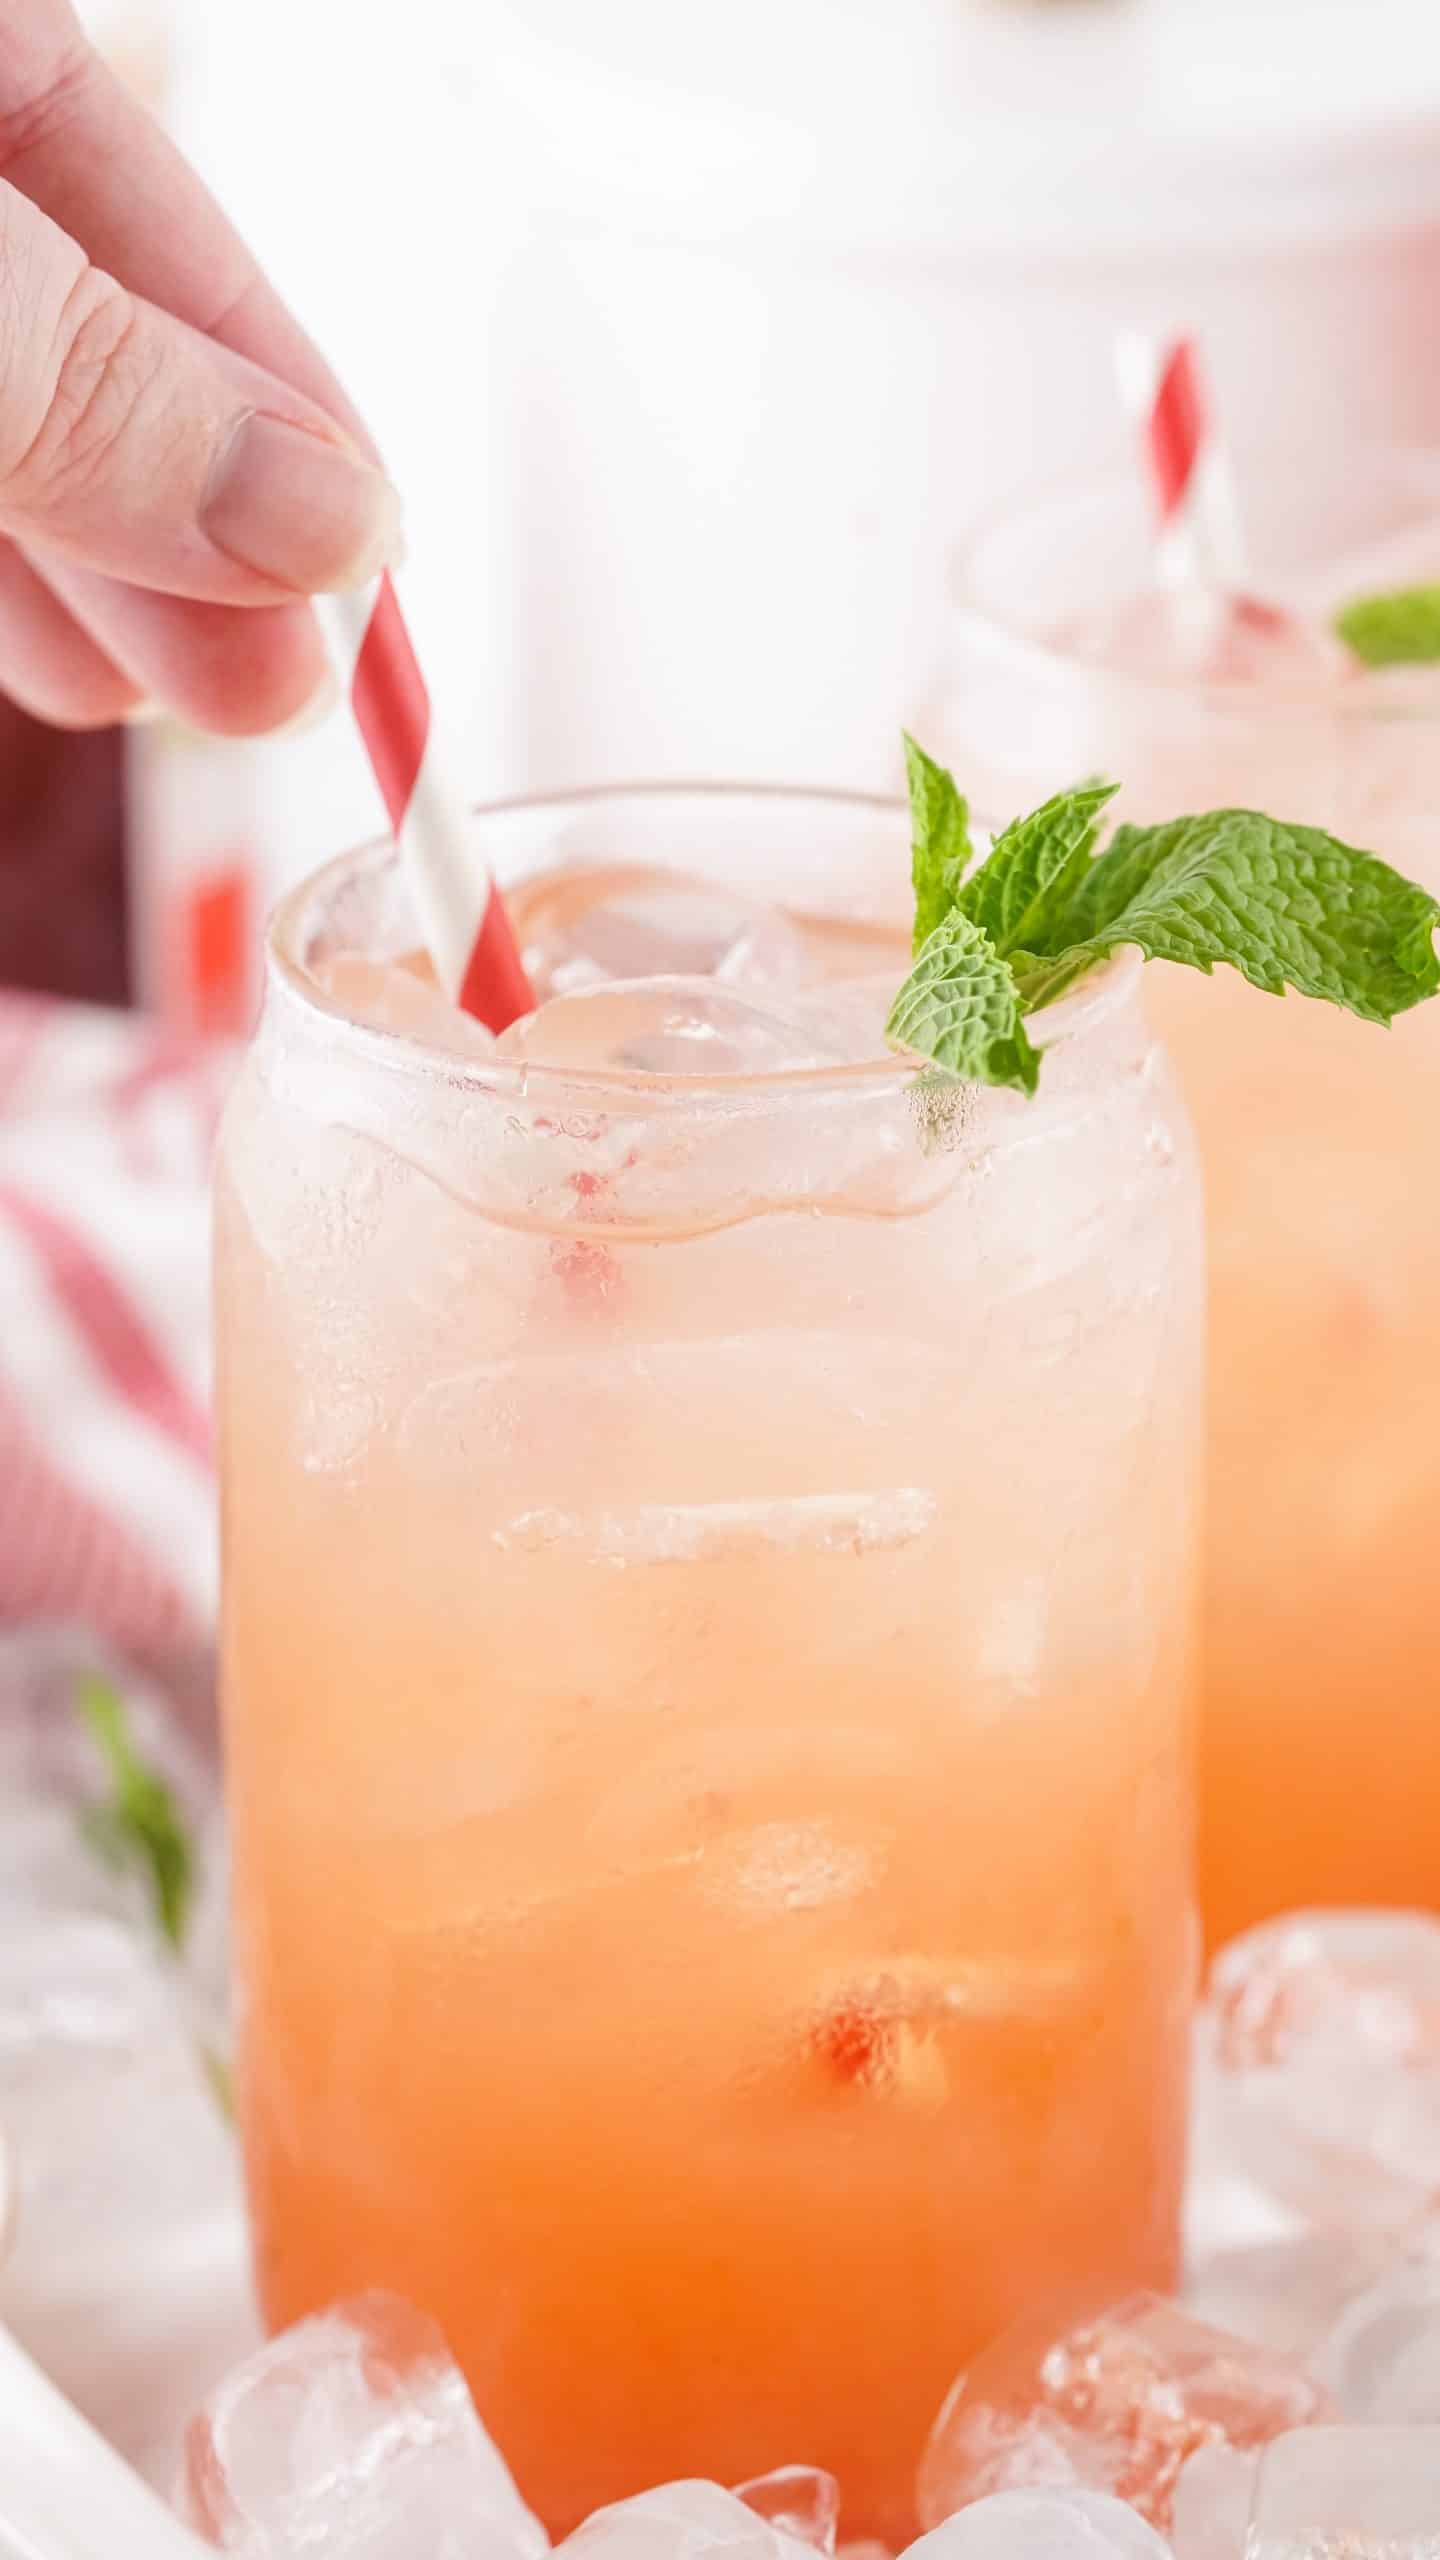 a hand sticking a striped paper straw in a glass filled with strawberry jam seltzer